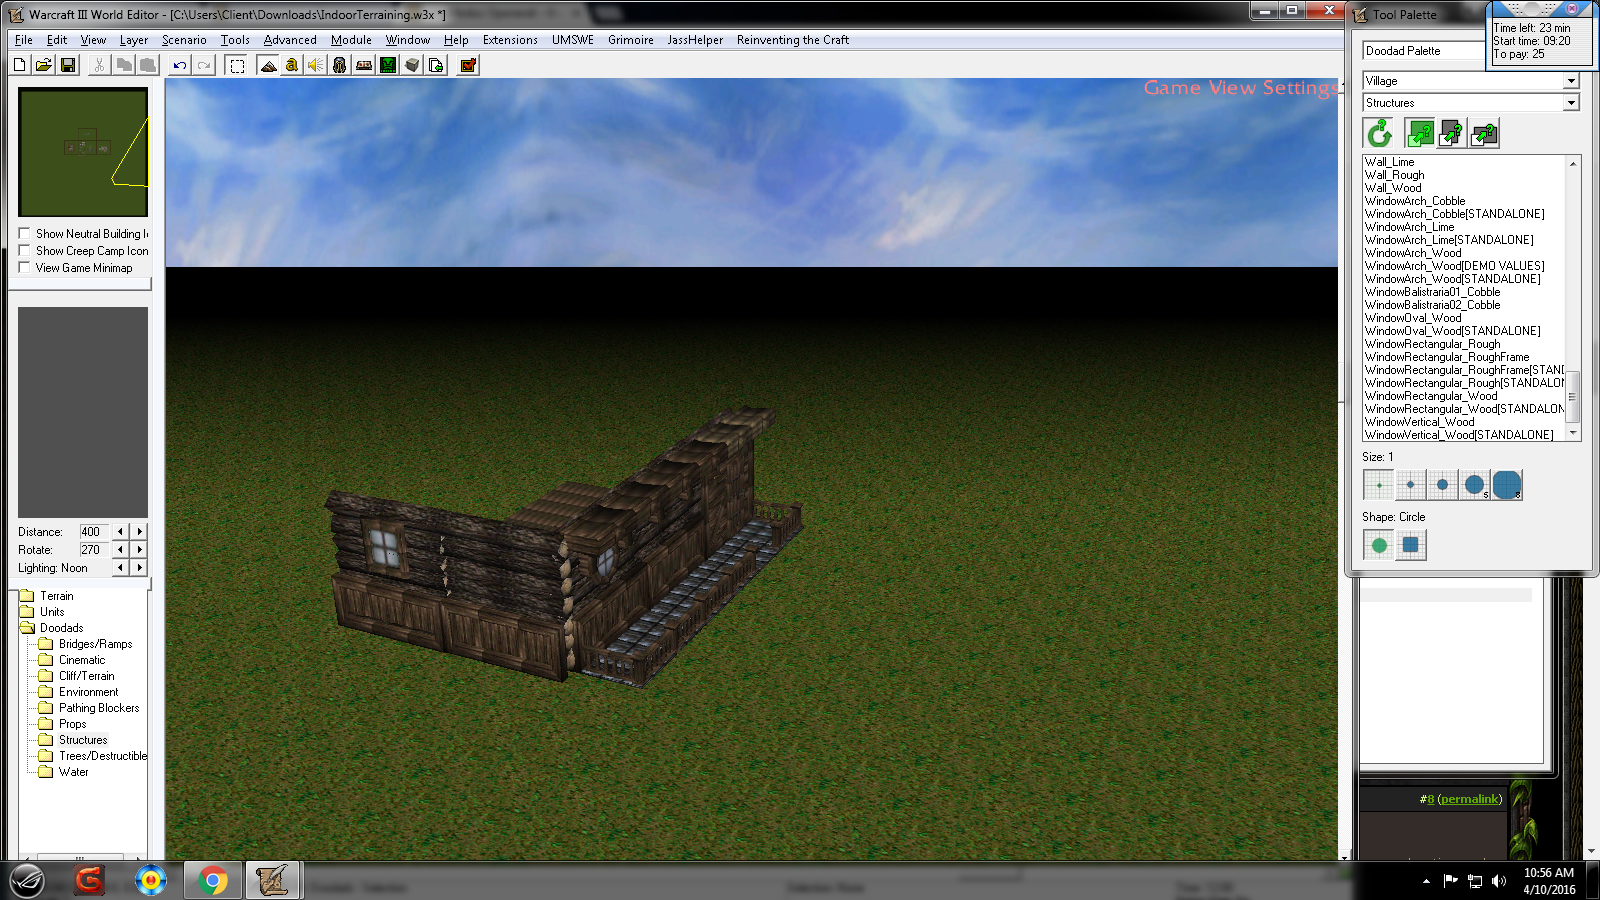 Building my own new medieval house ~! :D
Work in Progress
Progress - 1/10